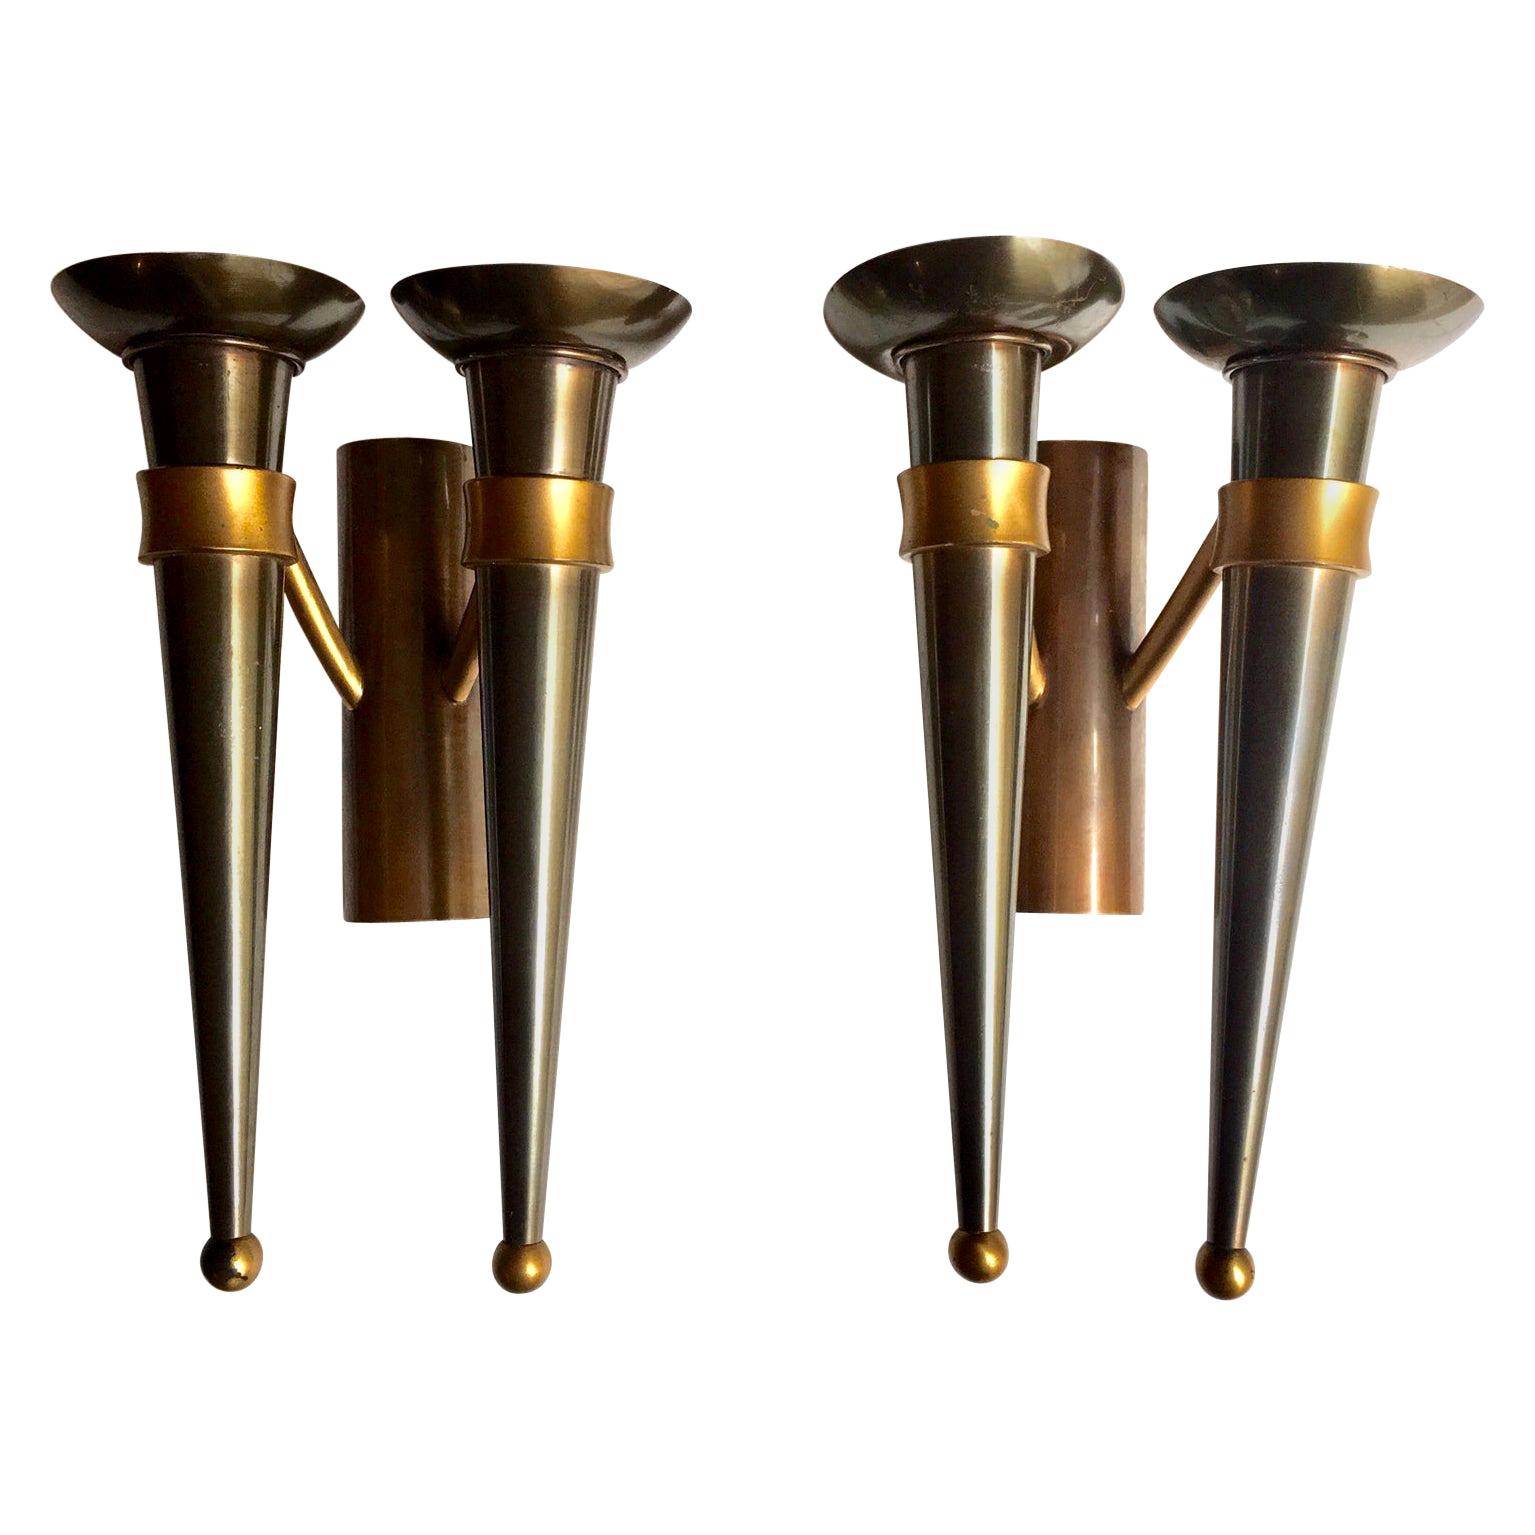 Pair of Midcentury Art Deco Style Double Torchère Wall Sconces